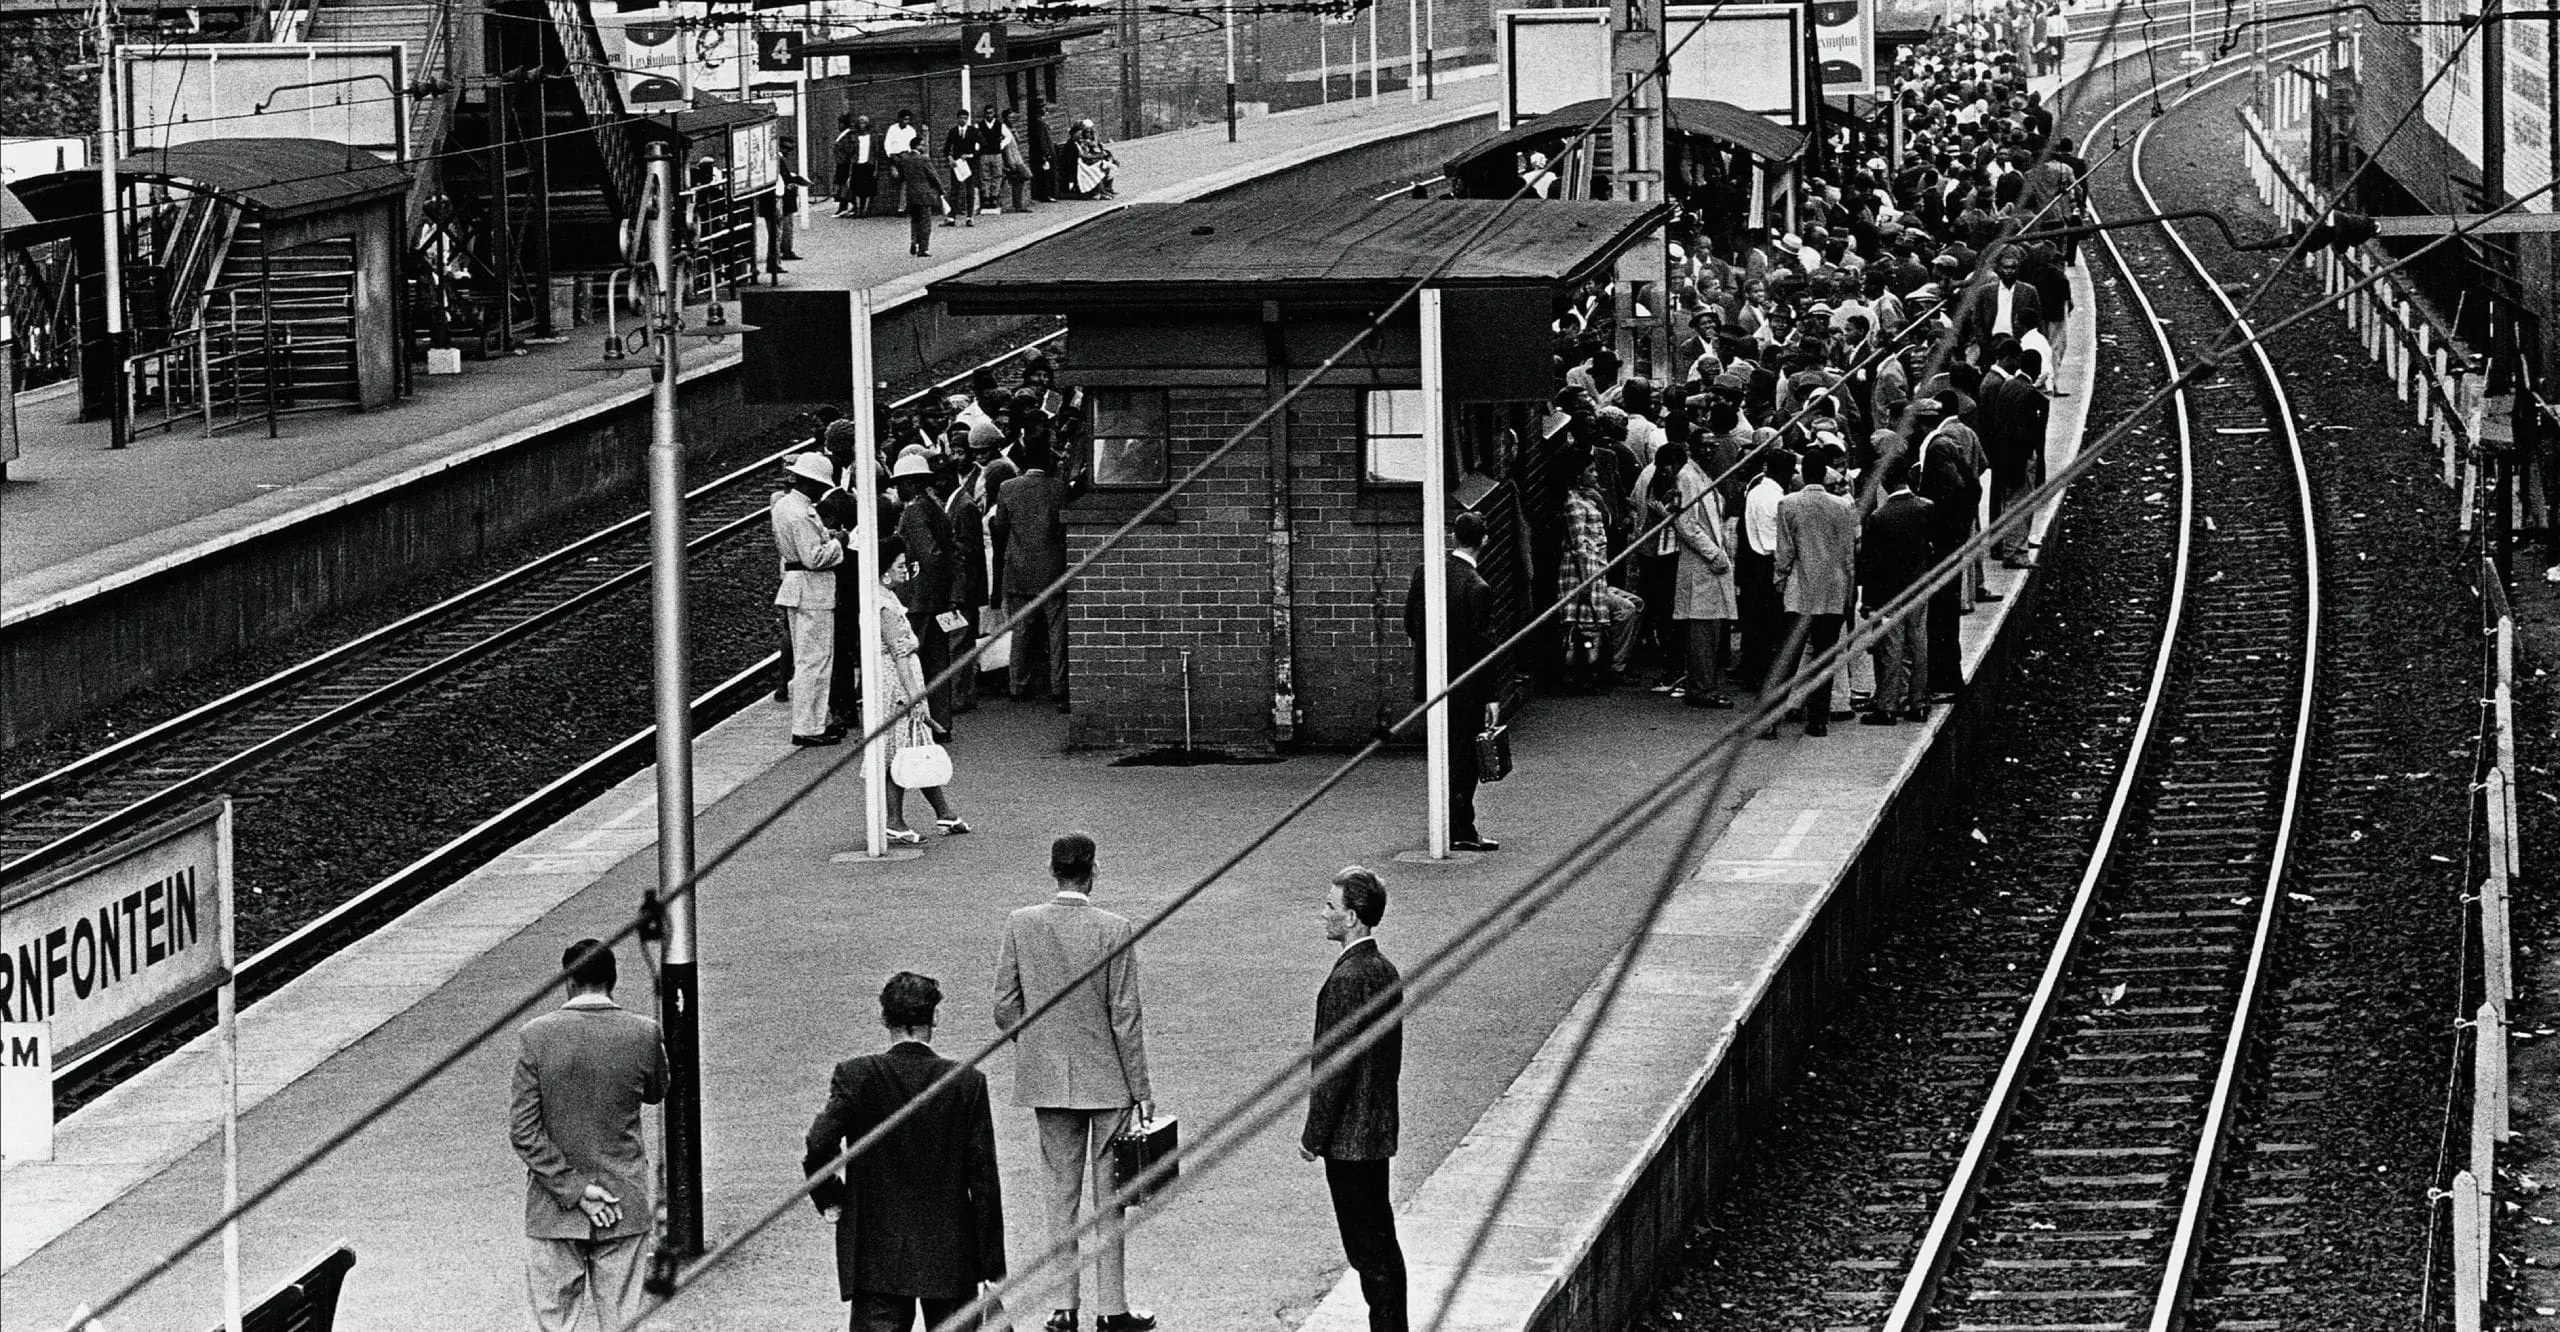 Black and white photograph showing a railway station platform in rush hour with crowds of Black people in the background tightly cramped together while a few white people stand on the almost empty platform, showing the reality of apartheid